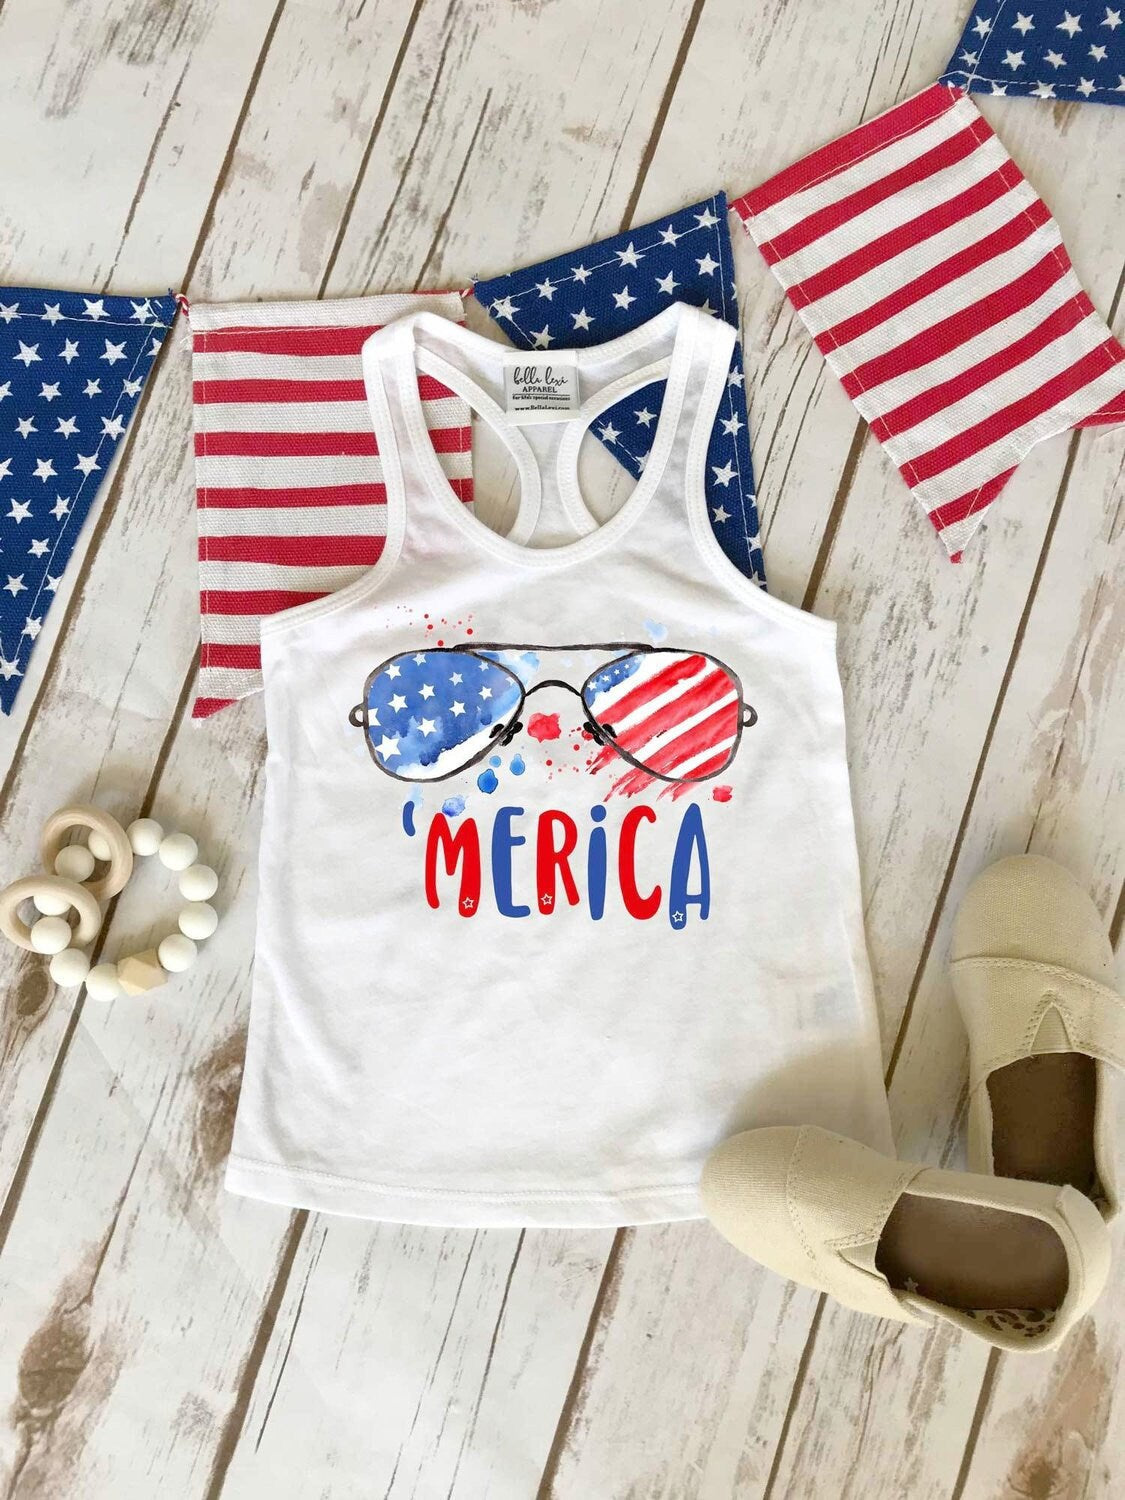 4th of July Outfit, MERICA Tank, Baby Shower Gift, Murica, Funny America Shirt, Red White Blue, 4th of July Shirts, First Fourth of July,